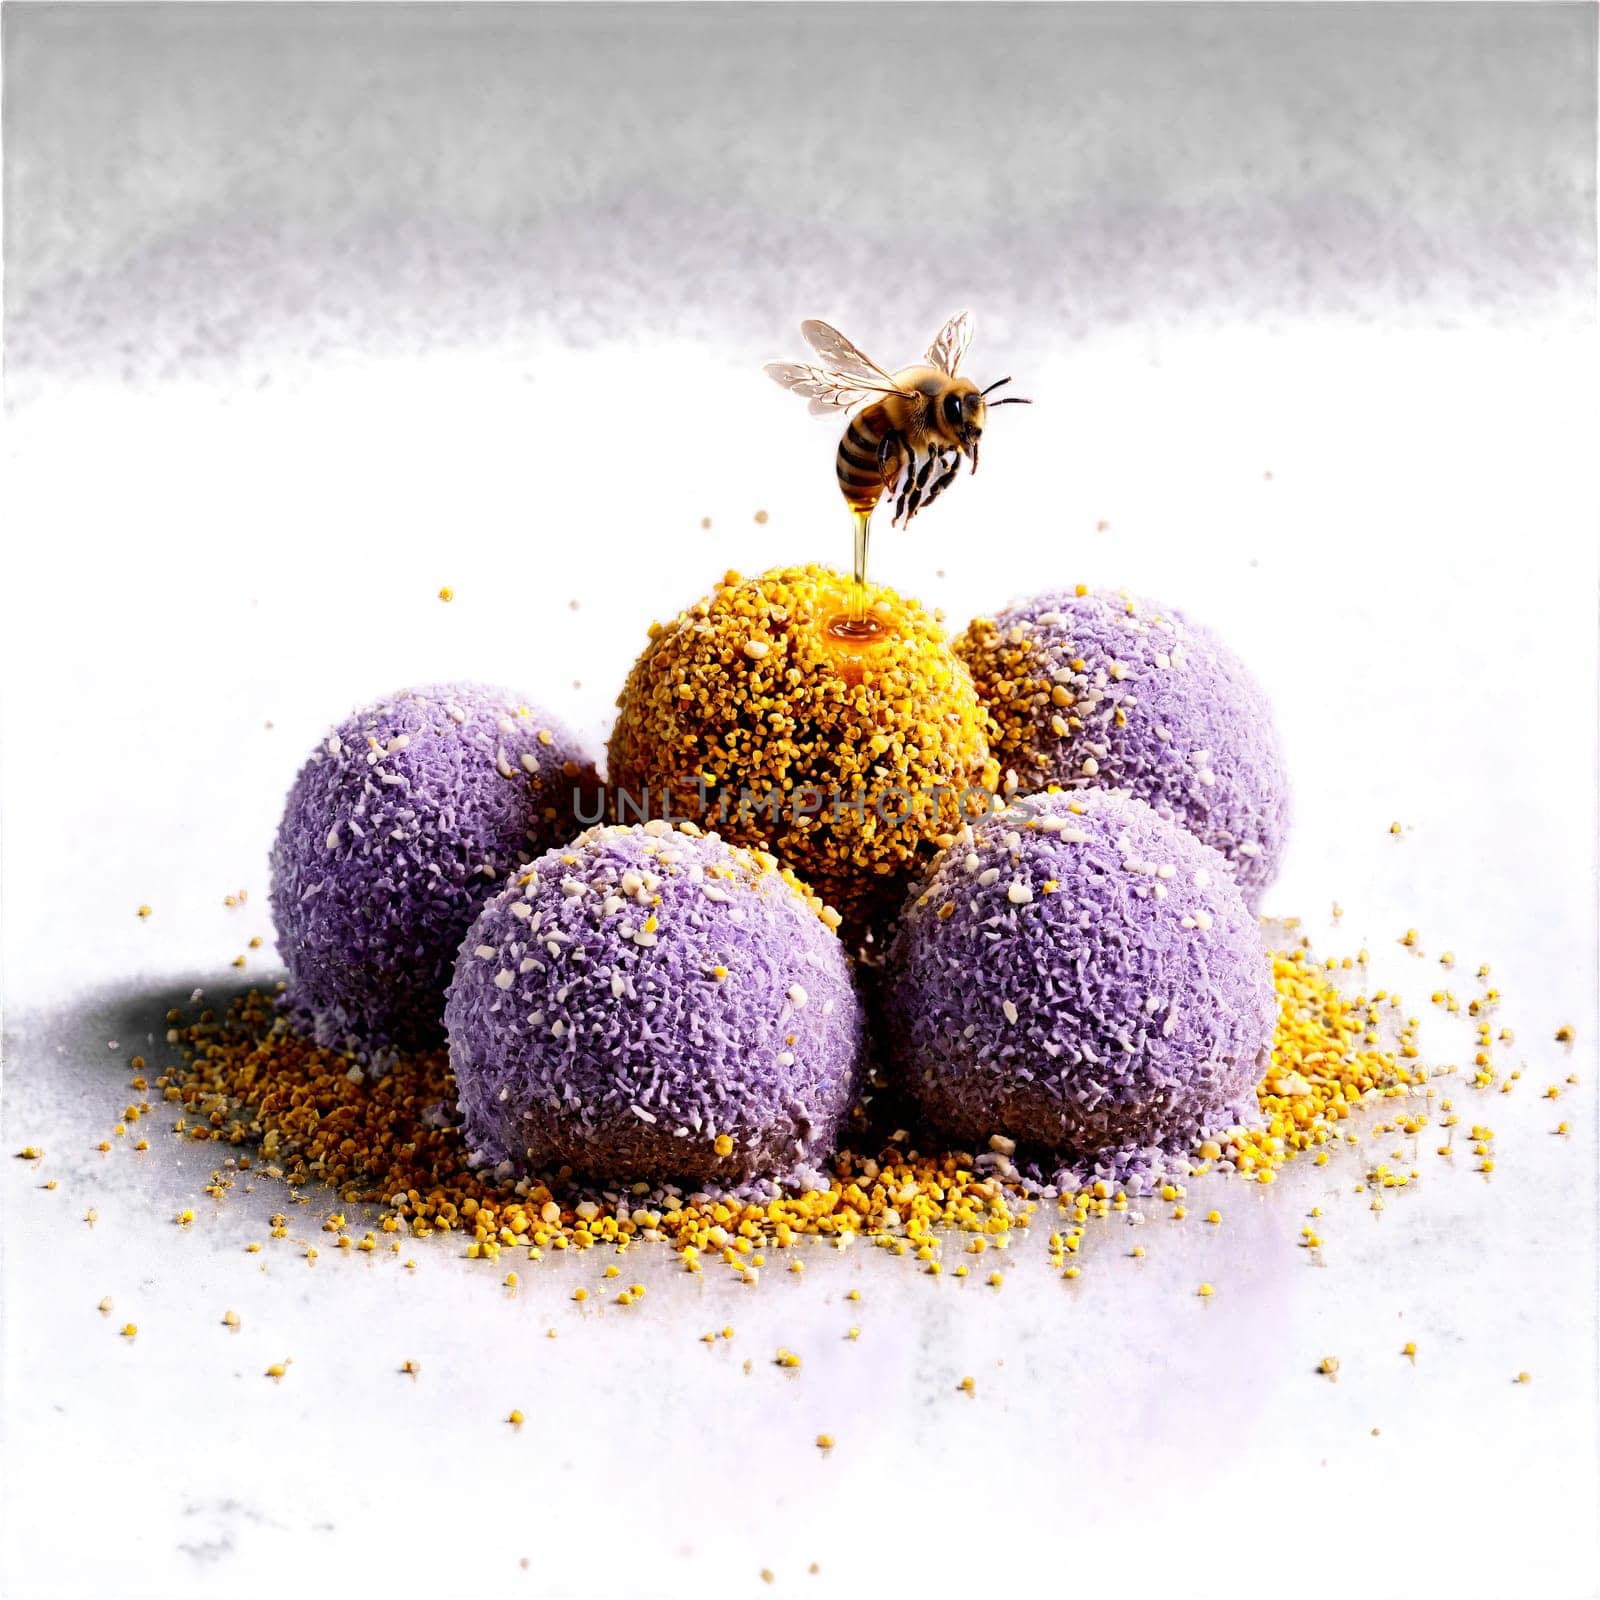 Lavender honey truffles dusted with bee pollen split open to reveal a floral creamy center by panophotograph